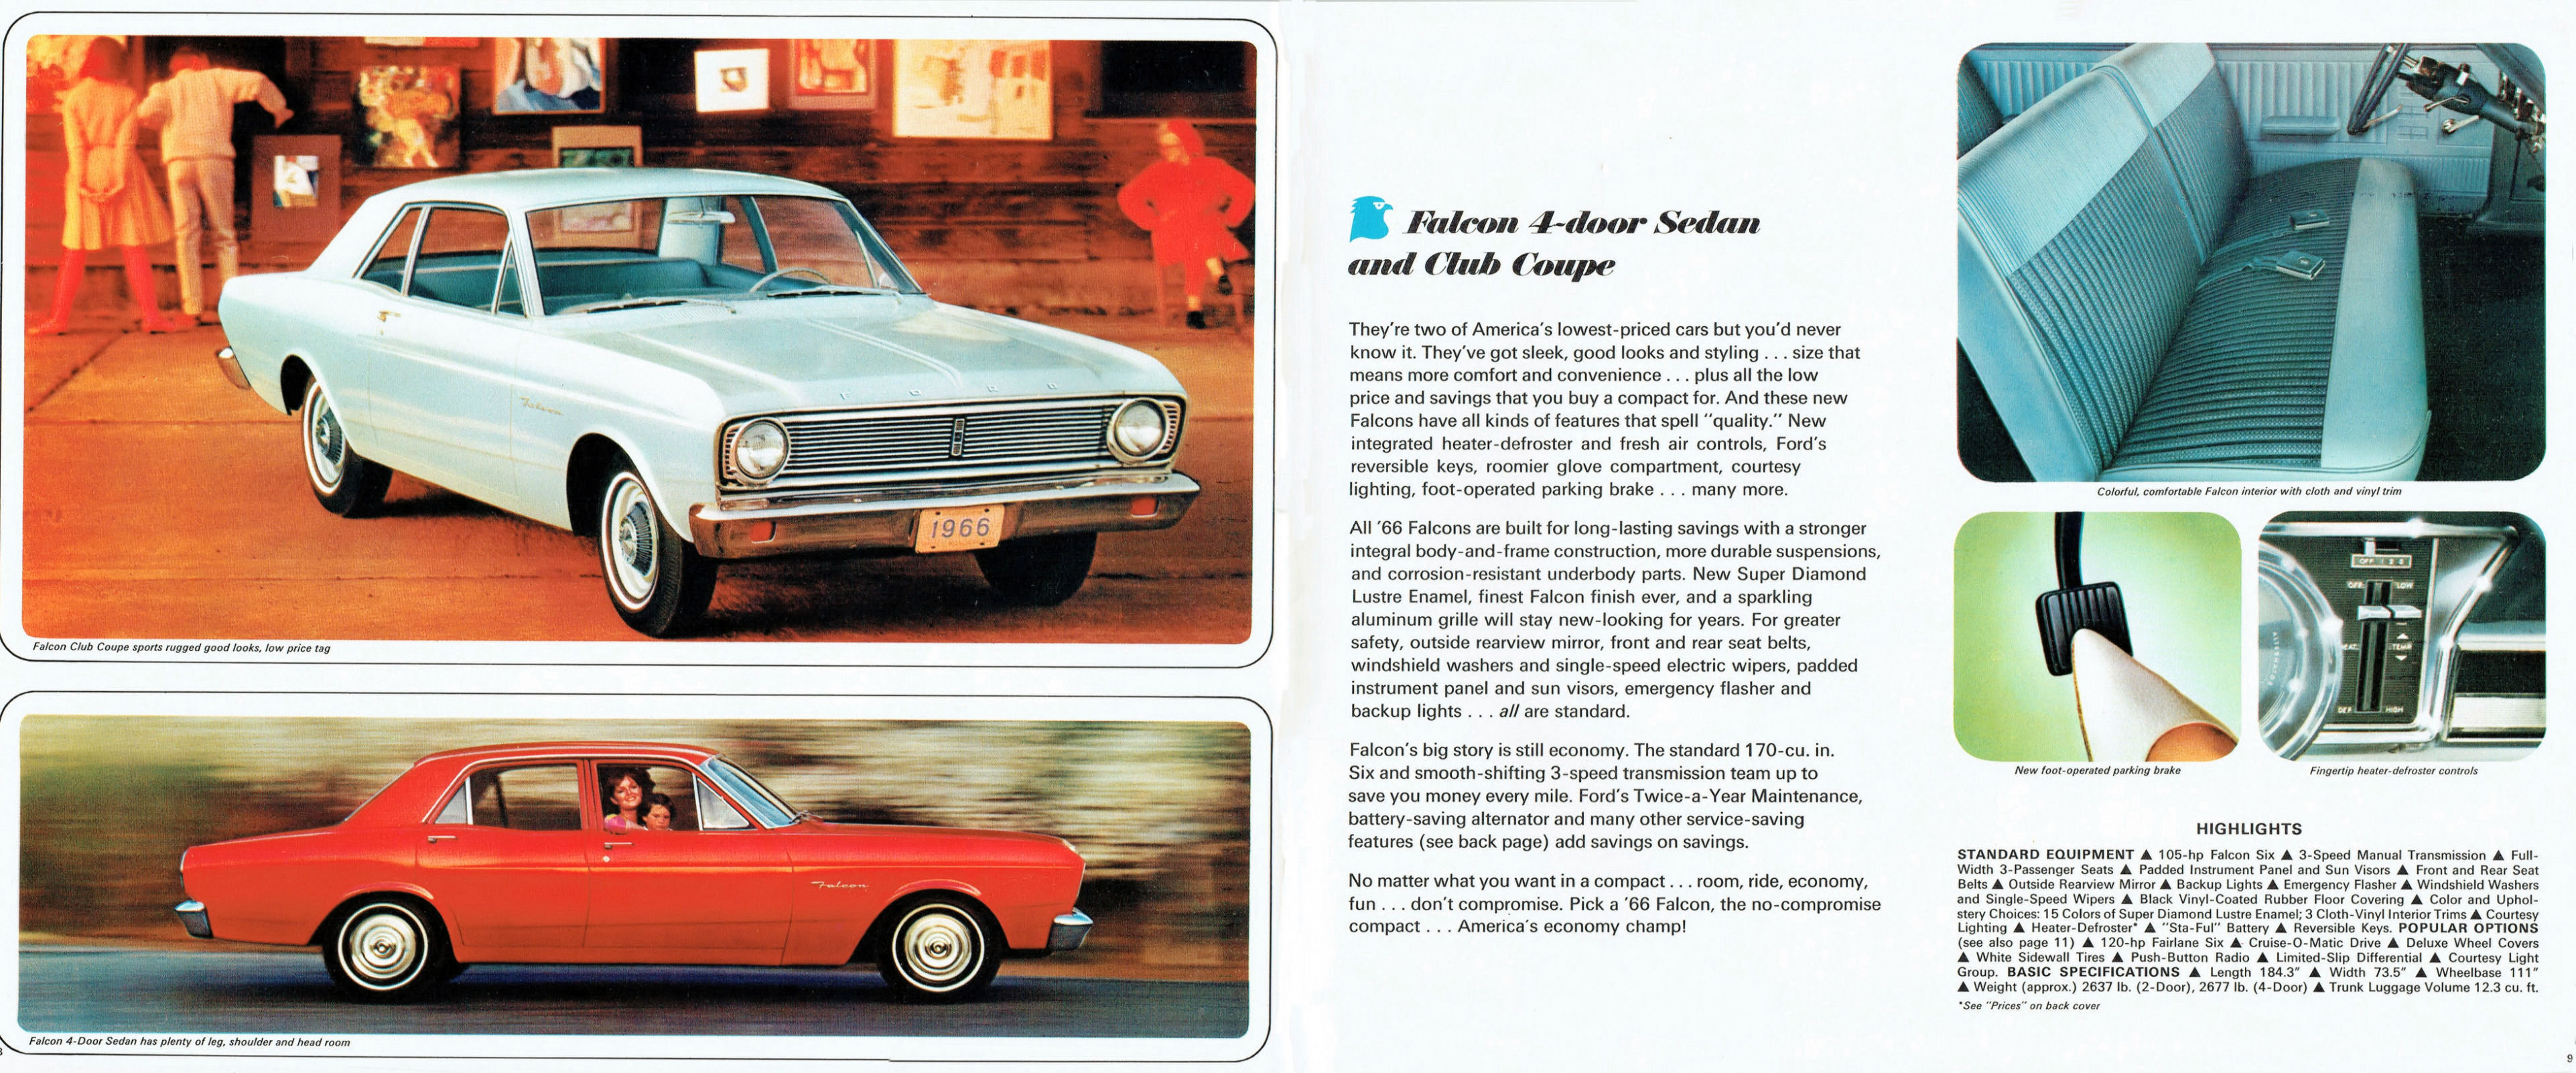 Details about   Ford 1966 Ford Falcon Brochure 24X24 inch poster